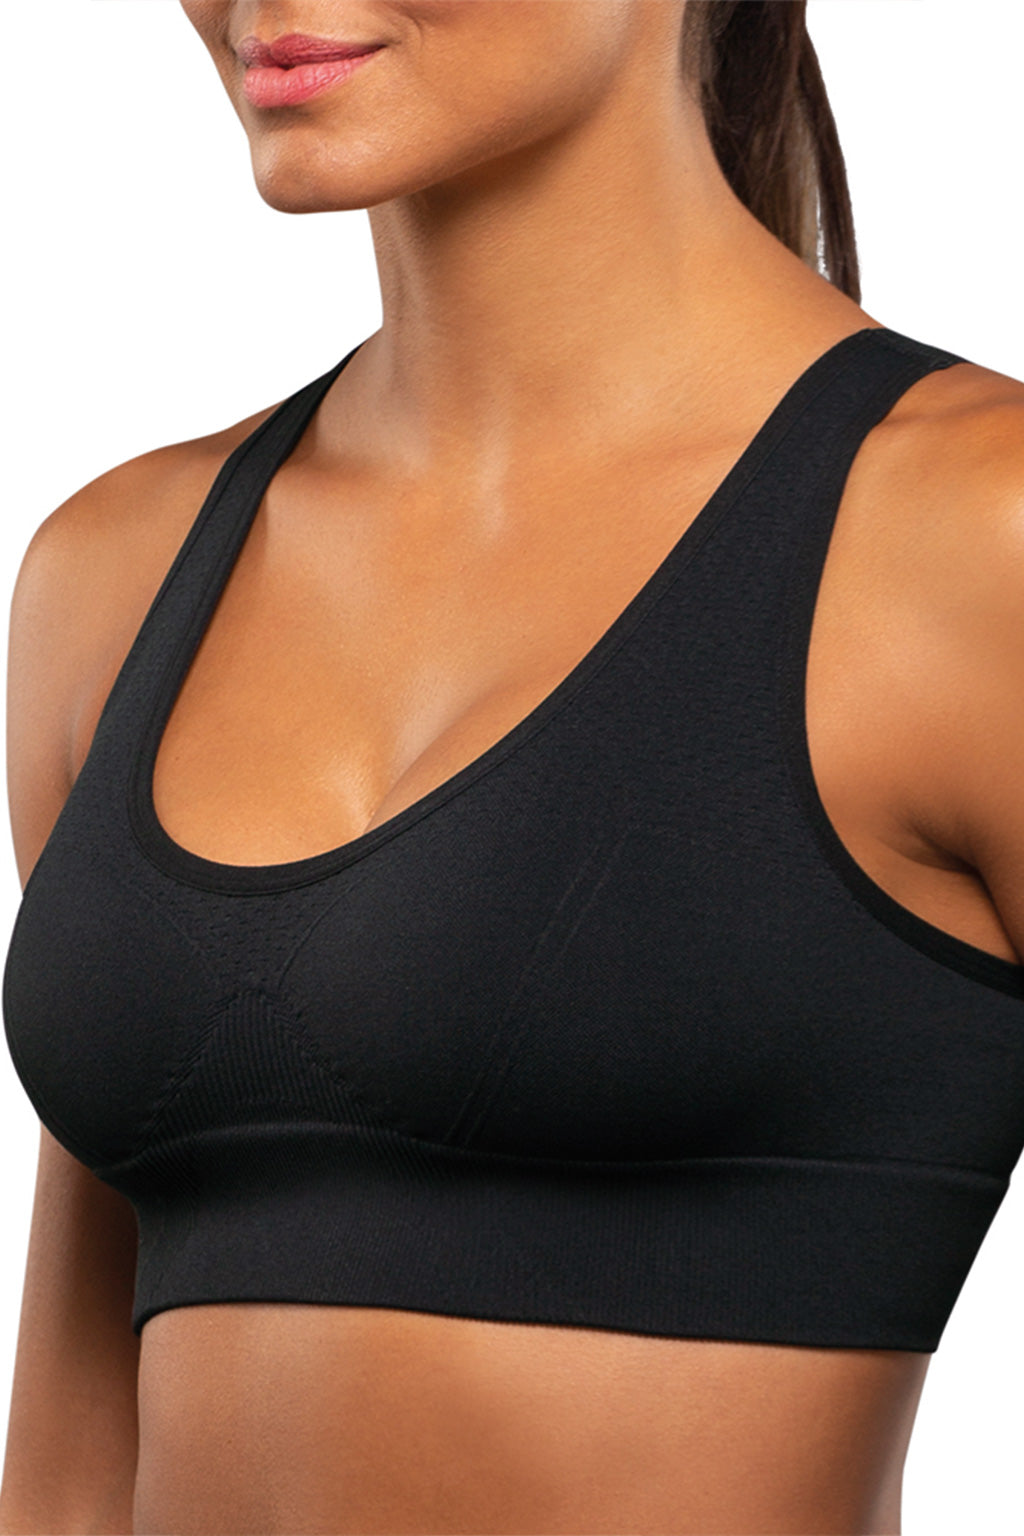 Top Up Control Comfort fit High Support Sport Bra